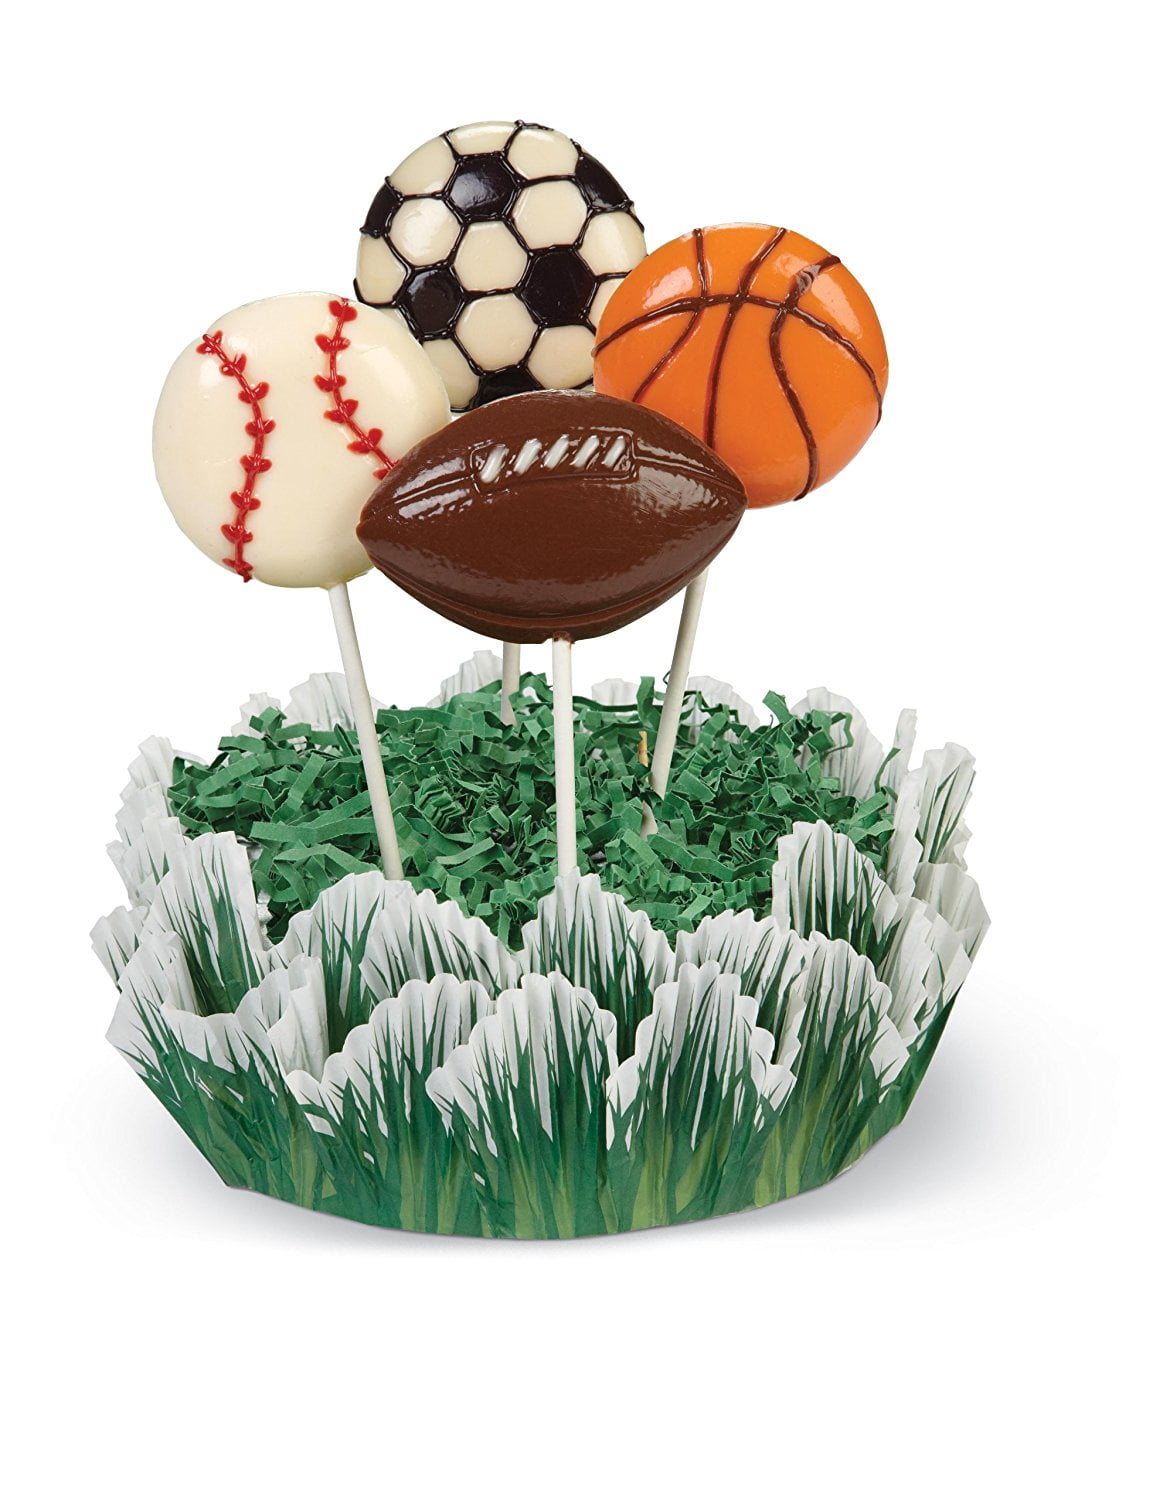 NFL Candy Mold – choose team – Cake Connection